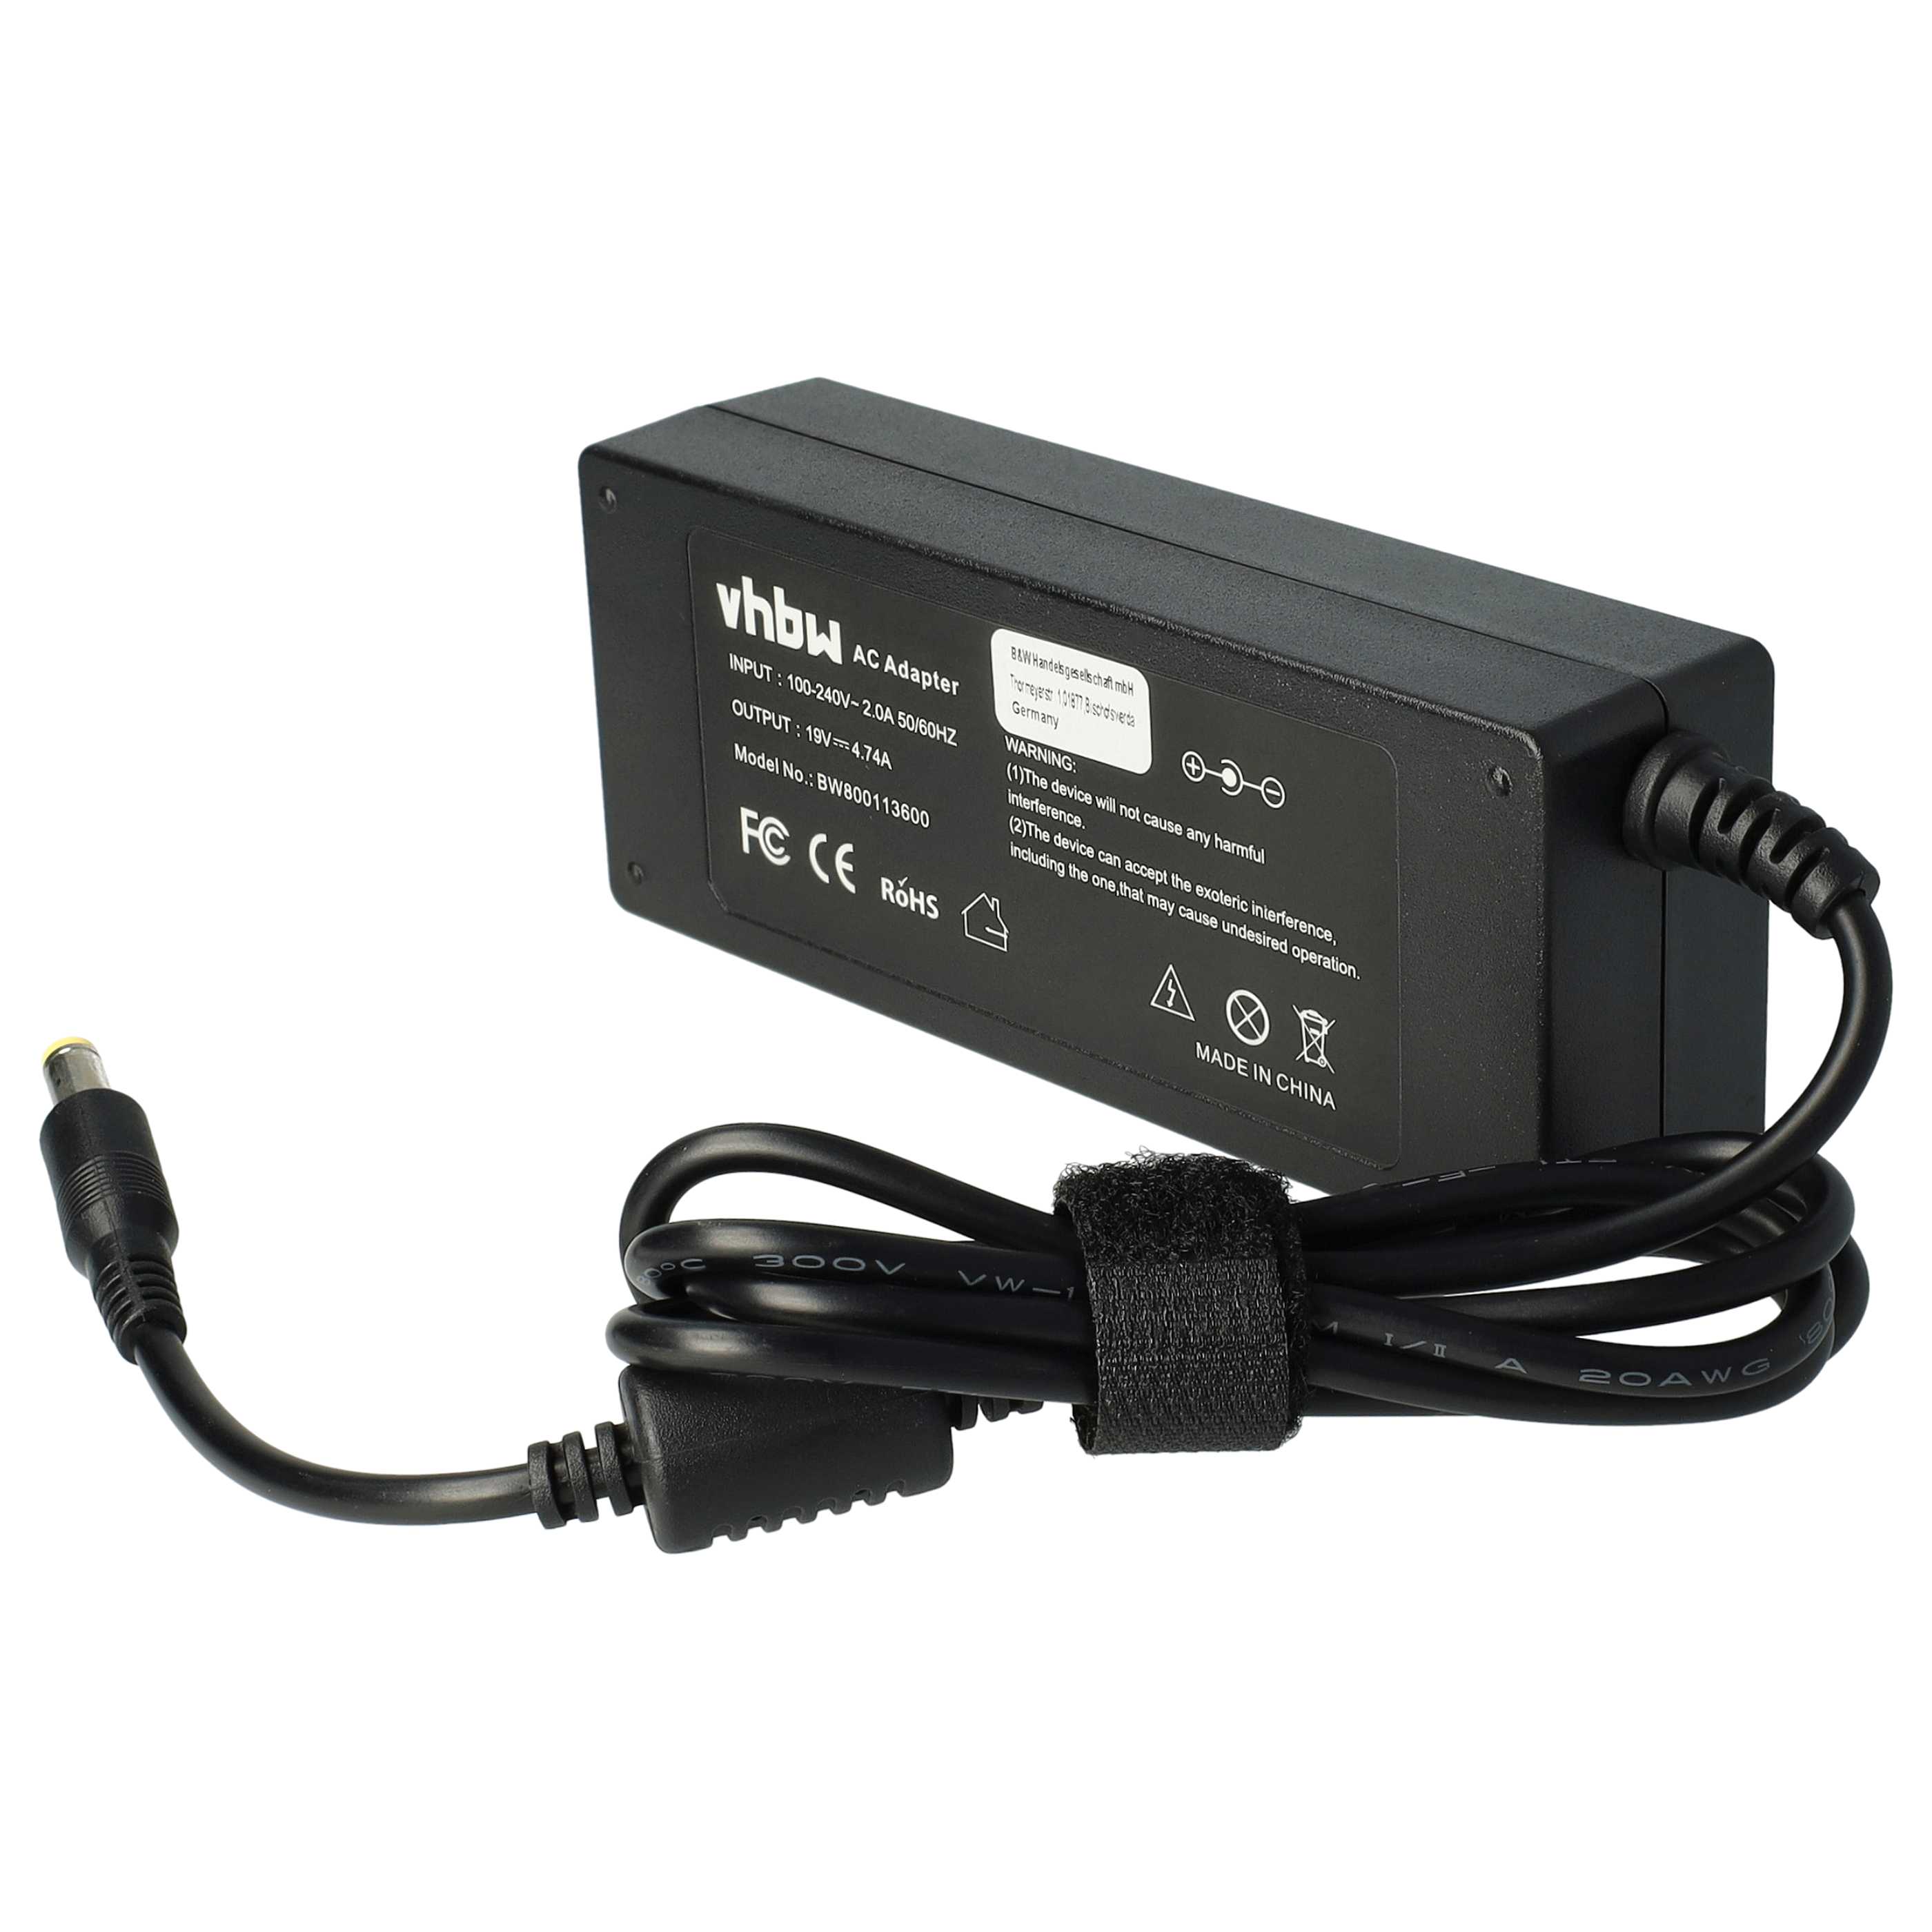 Mains Power Adapter replaces Acer 91.41Q28.002, 91.46W28.002, 91.42S28.002 for ToshibaNotebook etc., 90 W